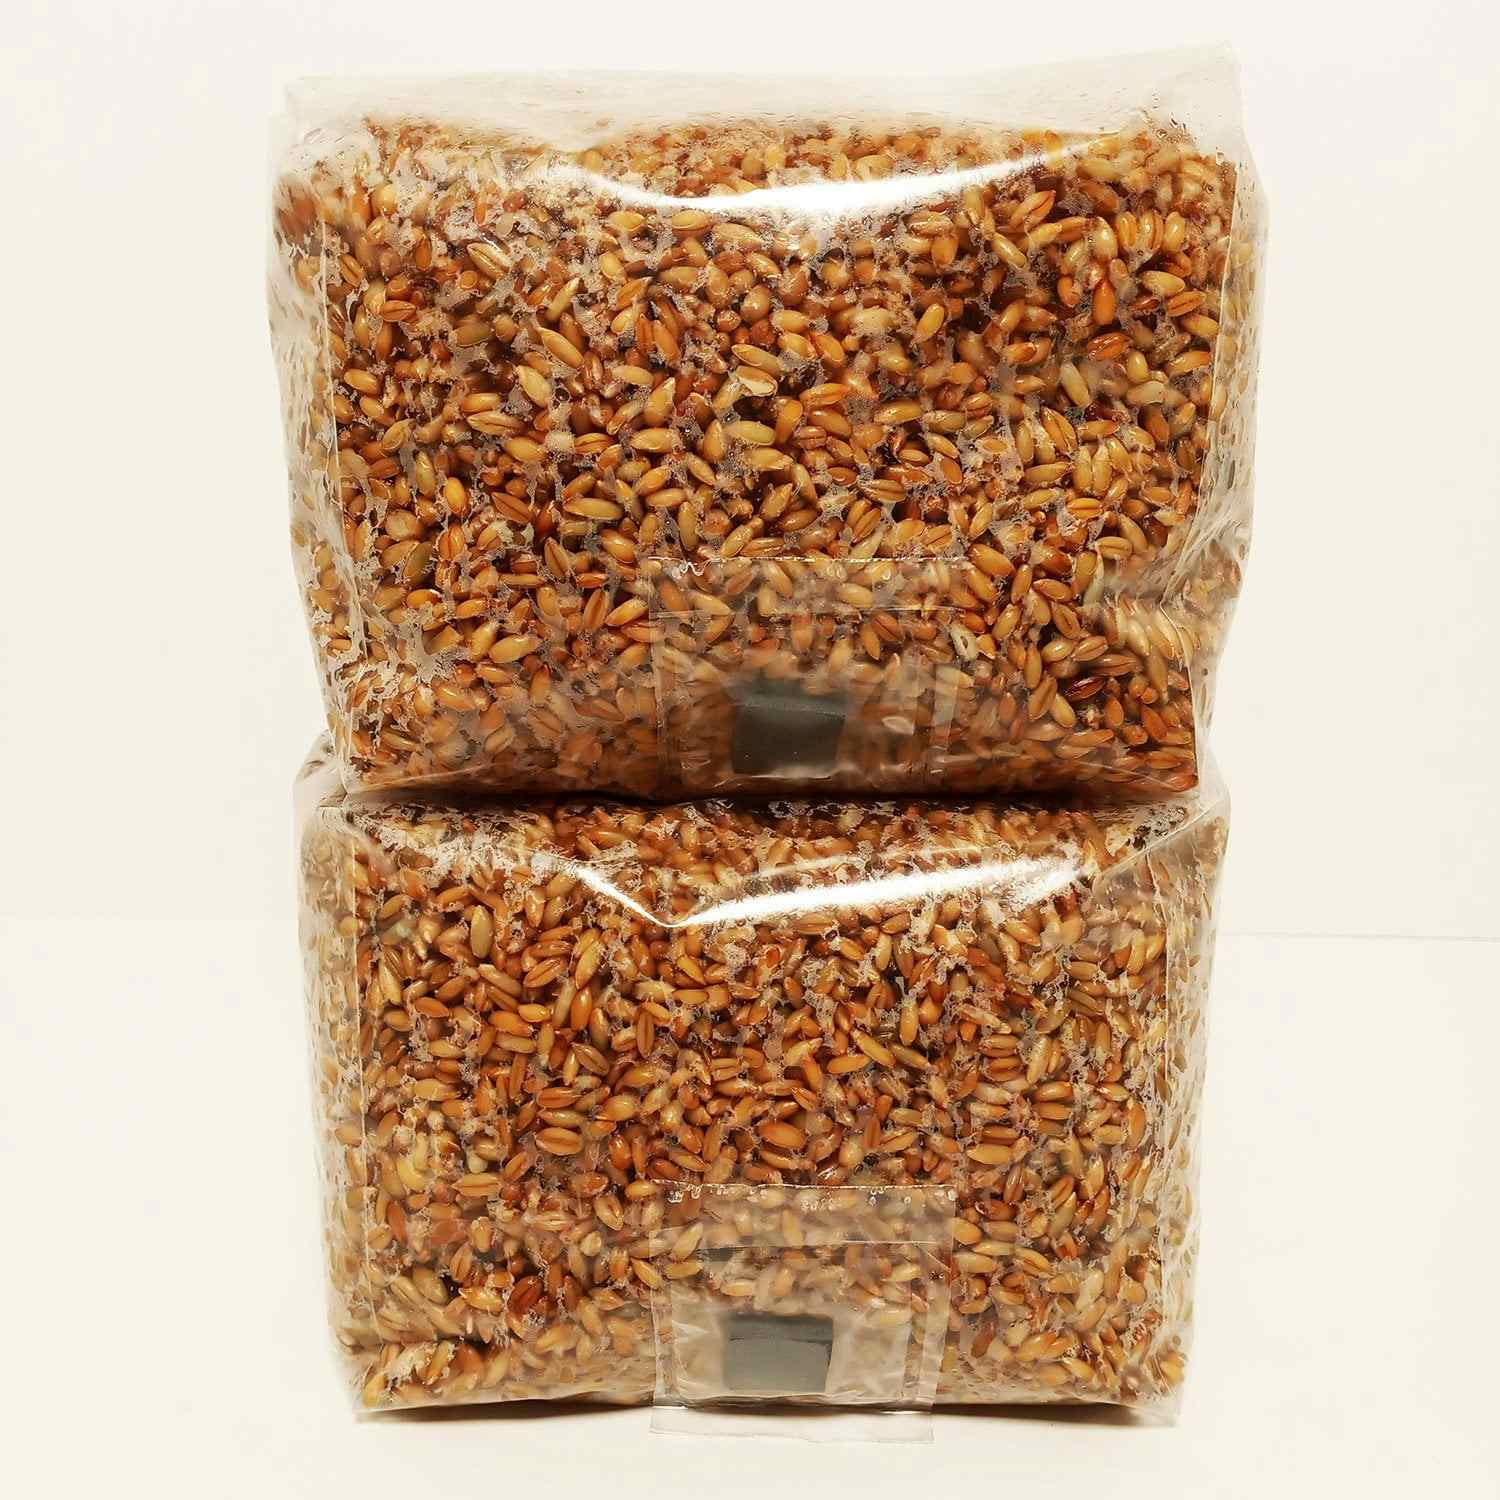 Sterilized Rye Berries Mushroom Substrate in Unicorn Bags with Self Healing Injection Ports for Grain Spawn (2 x 3 lb.)